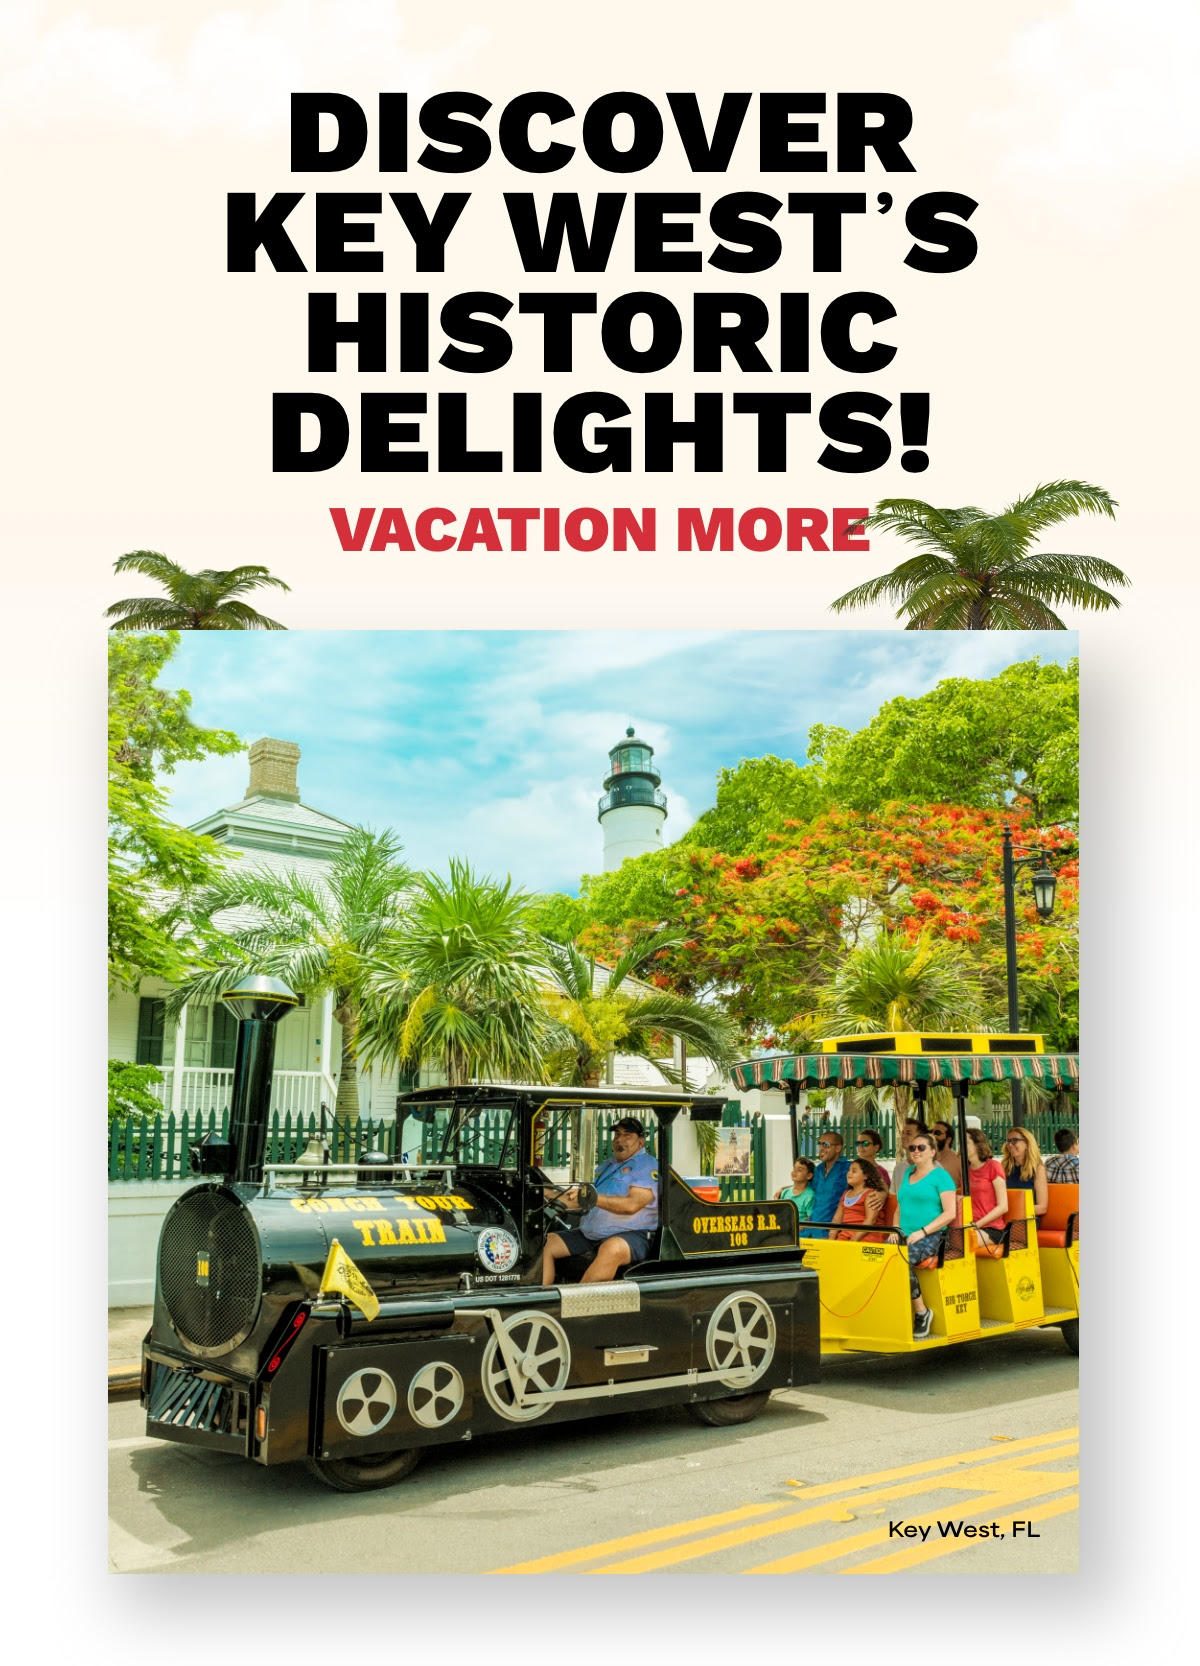 ALL ABOARD the Conch Tour Train - One of the most popular Key West Attractions